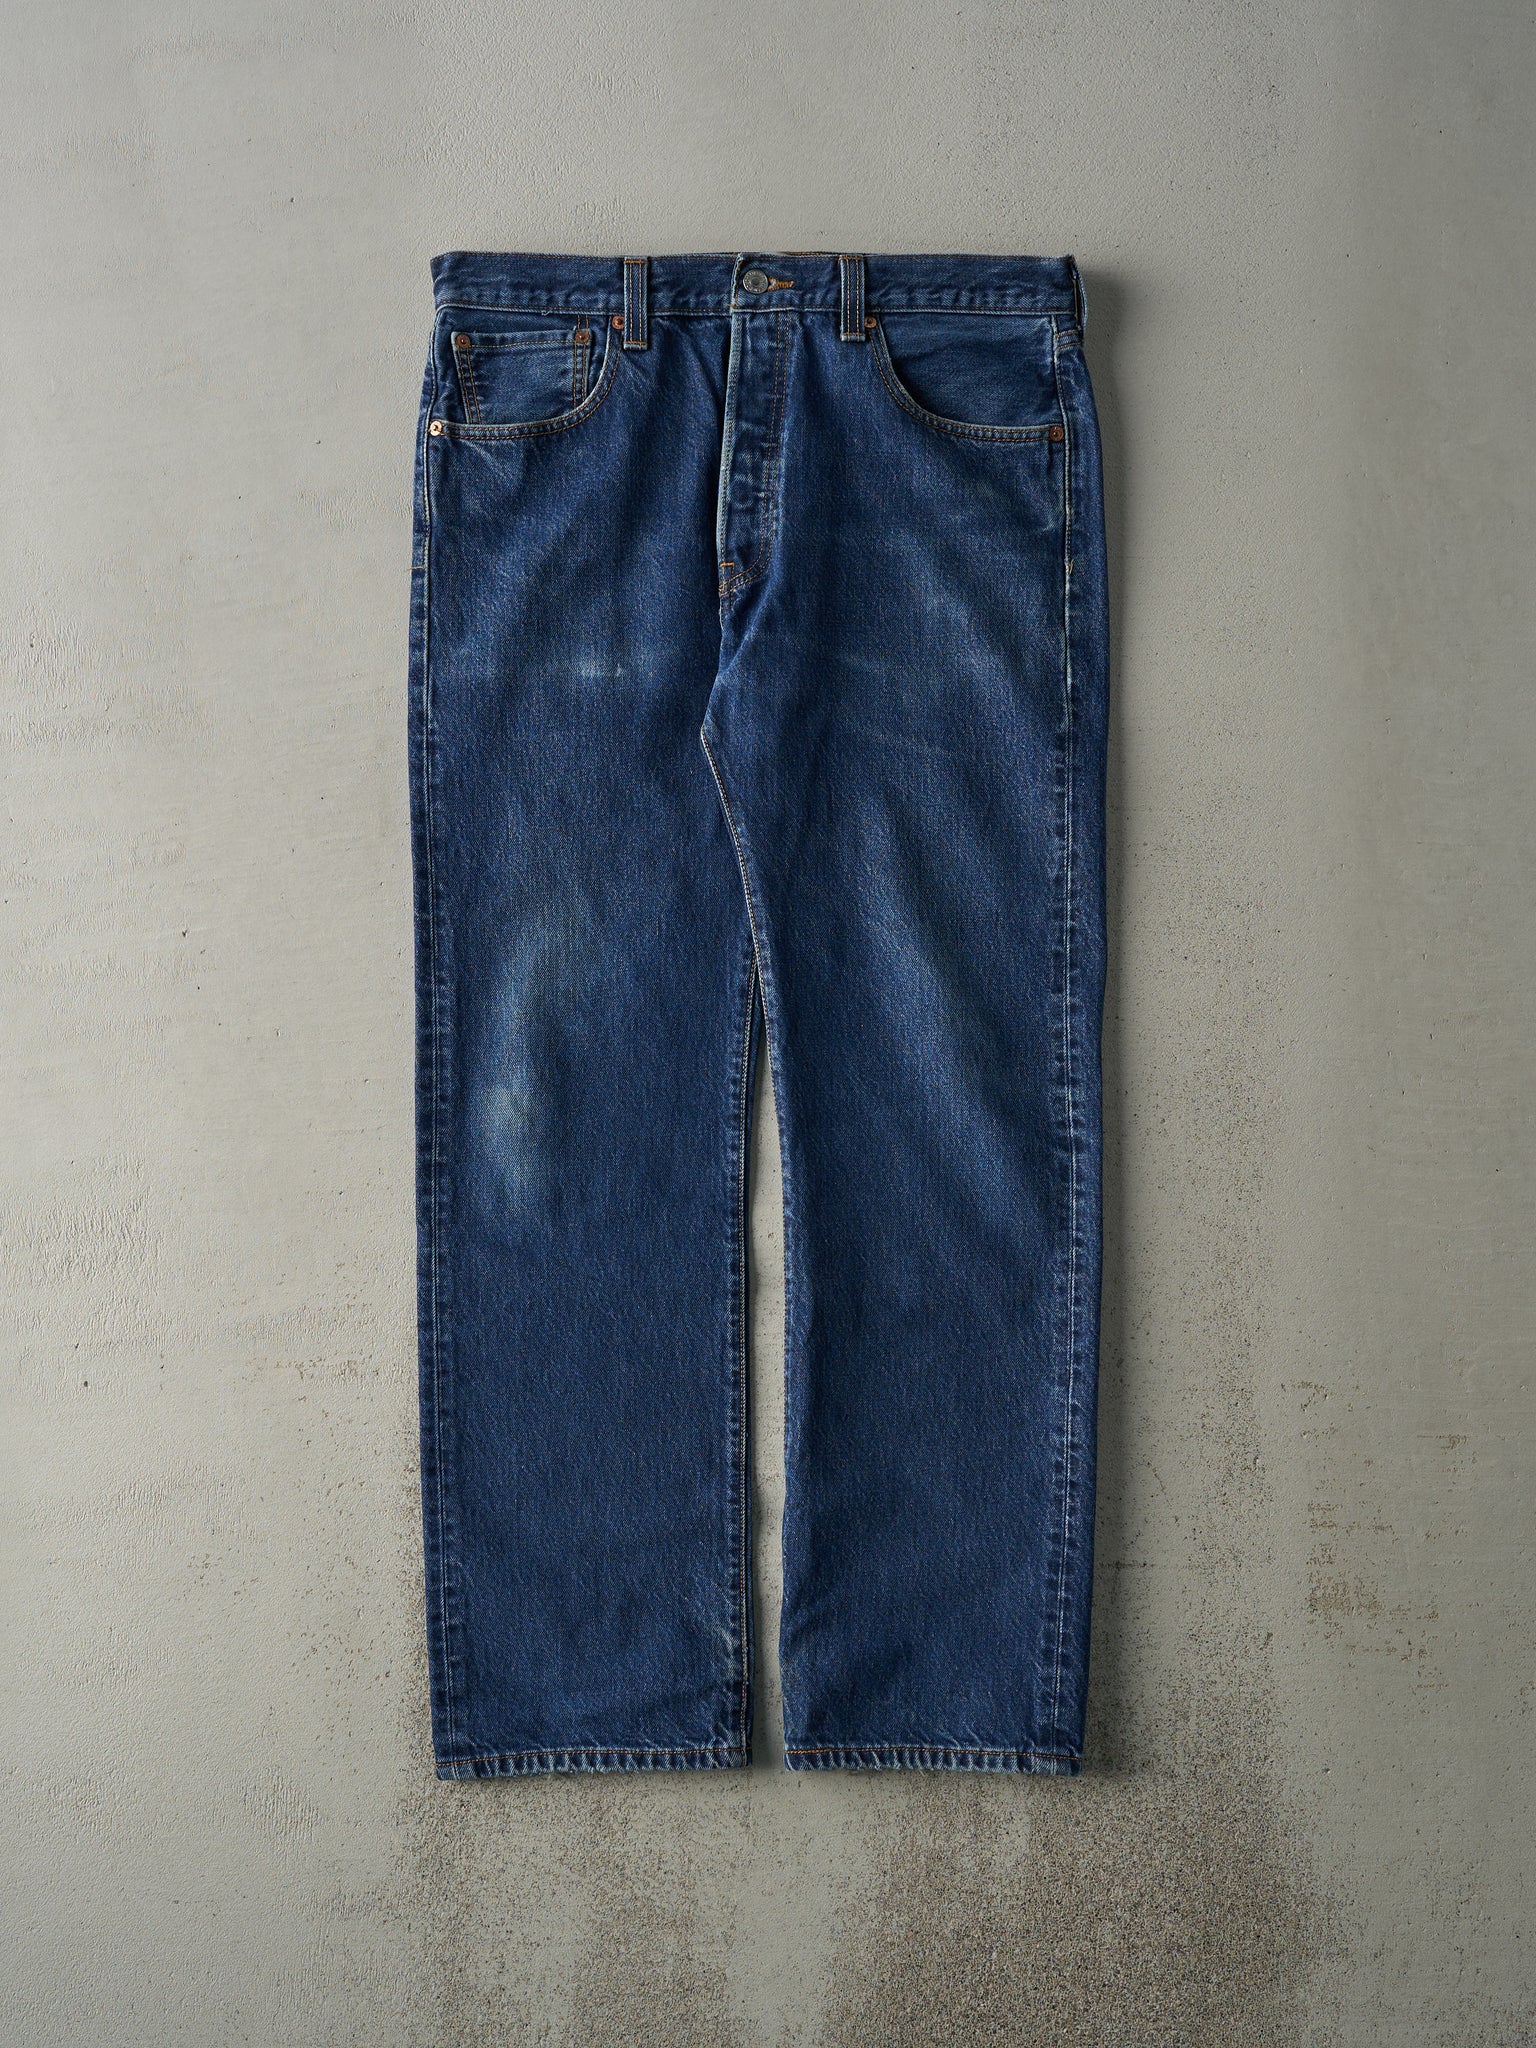 Vintage Y2K Faded Mid Wash Levi's 501 Jeans (34x30)